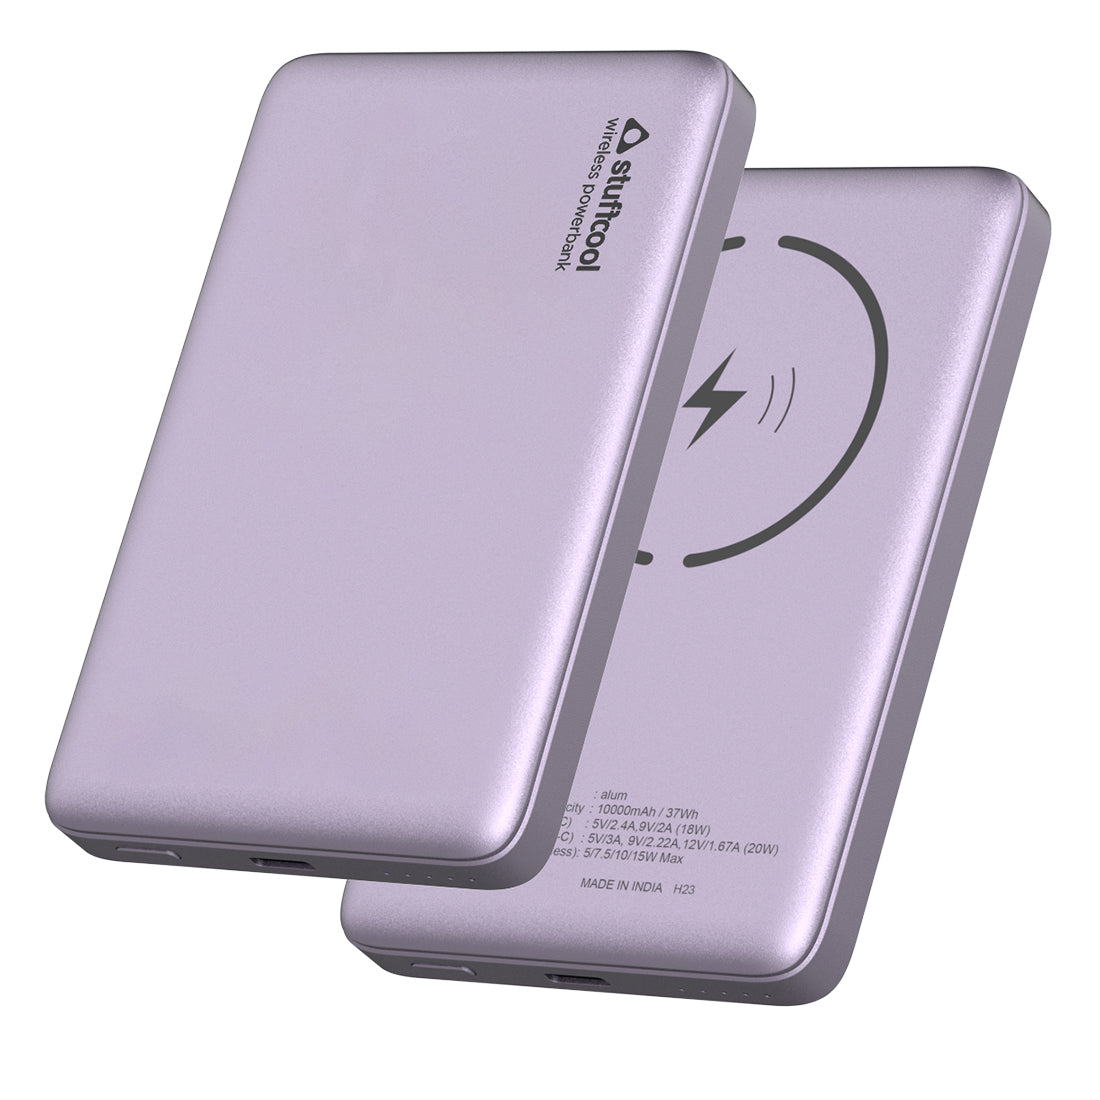 Powerbank: Stuffcool 10000mAh Magnetic Wireless Powerbank launched at Rs  4,990 - Times of India